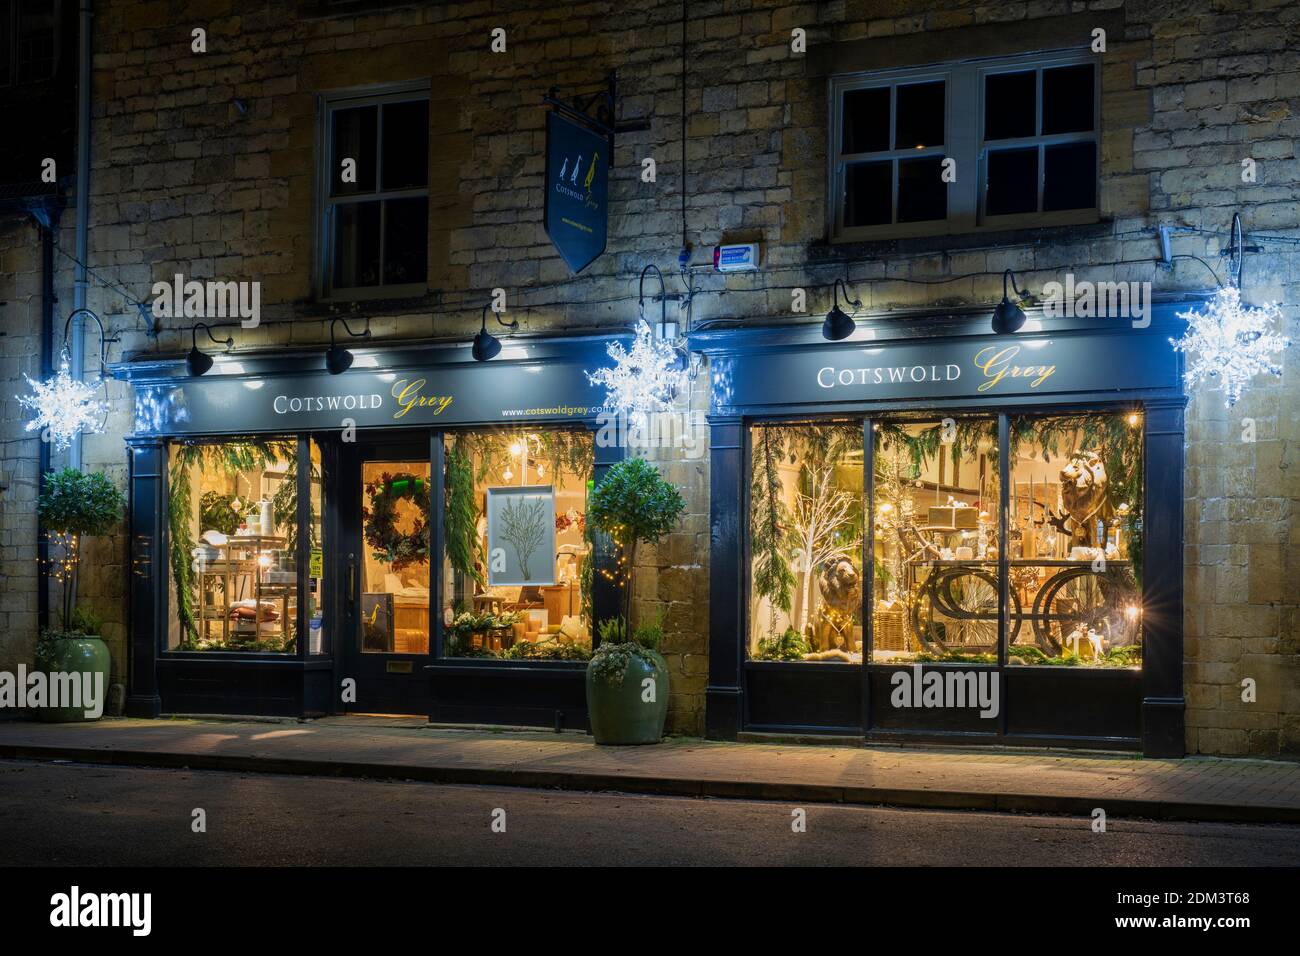 Cotswold Grey shop after dark at christmas. Moreton in Marsh, Cotswolds, Gloucestershire, England Stock Photo